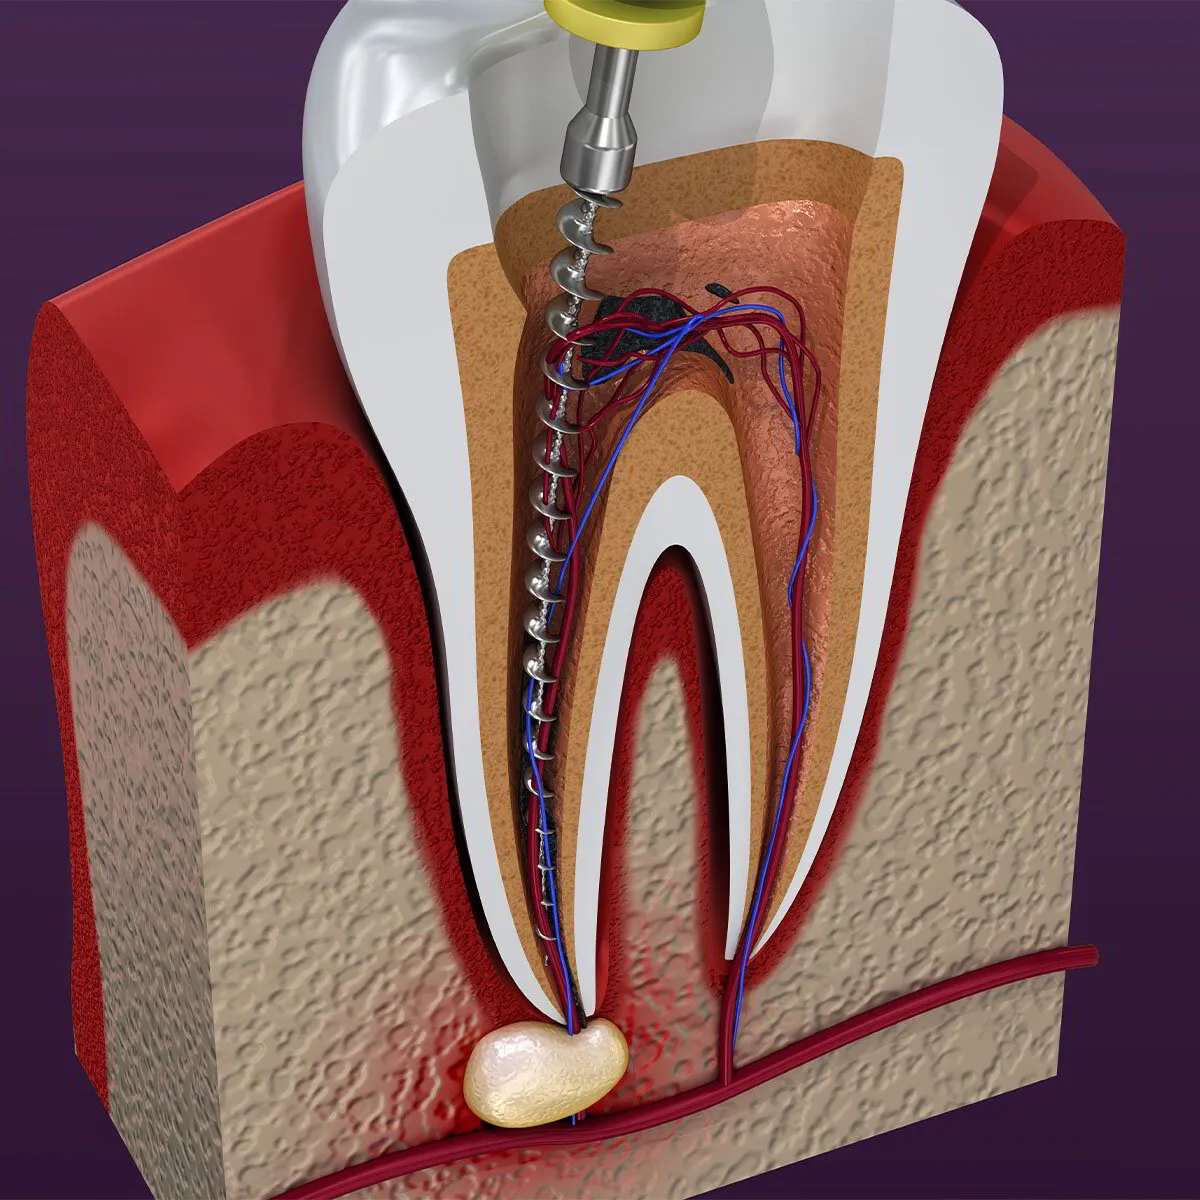 Healing of root canal treatment in Lotus Dental